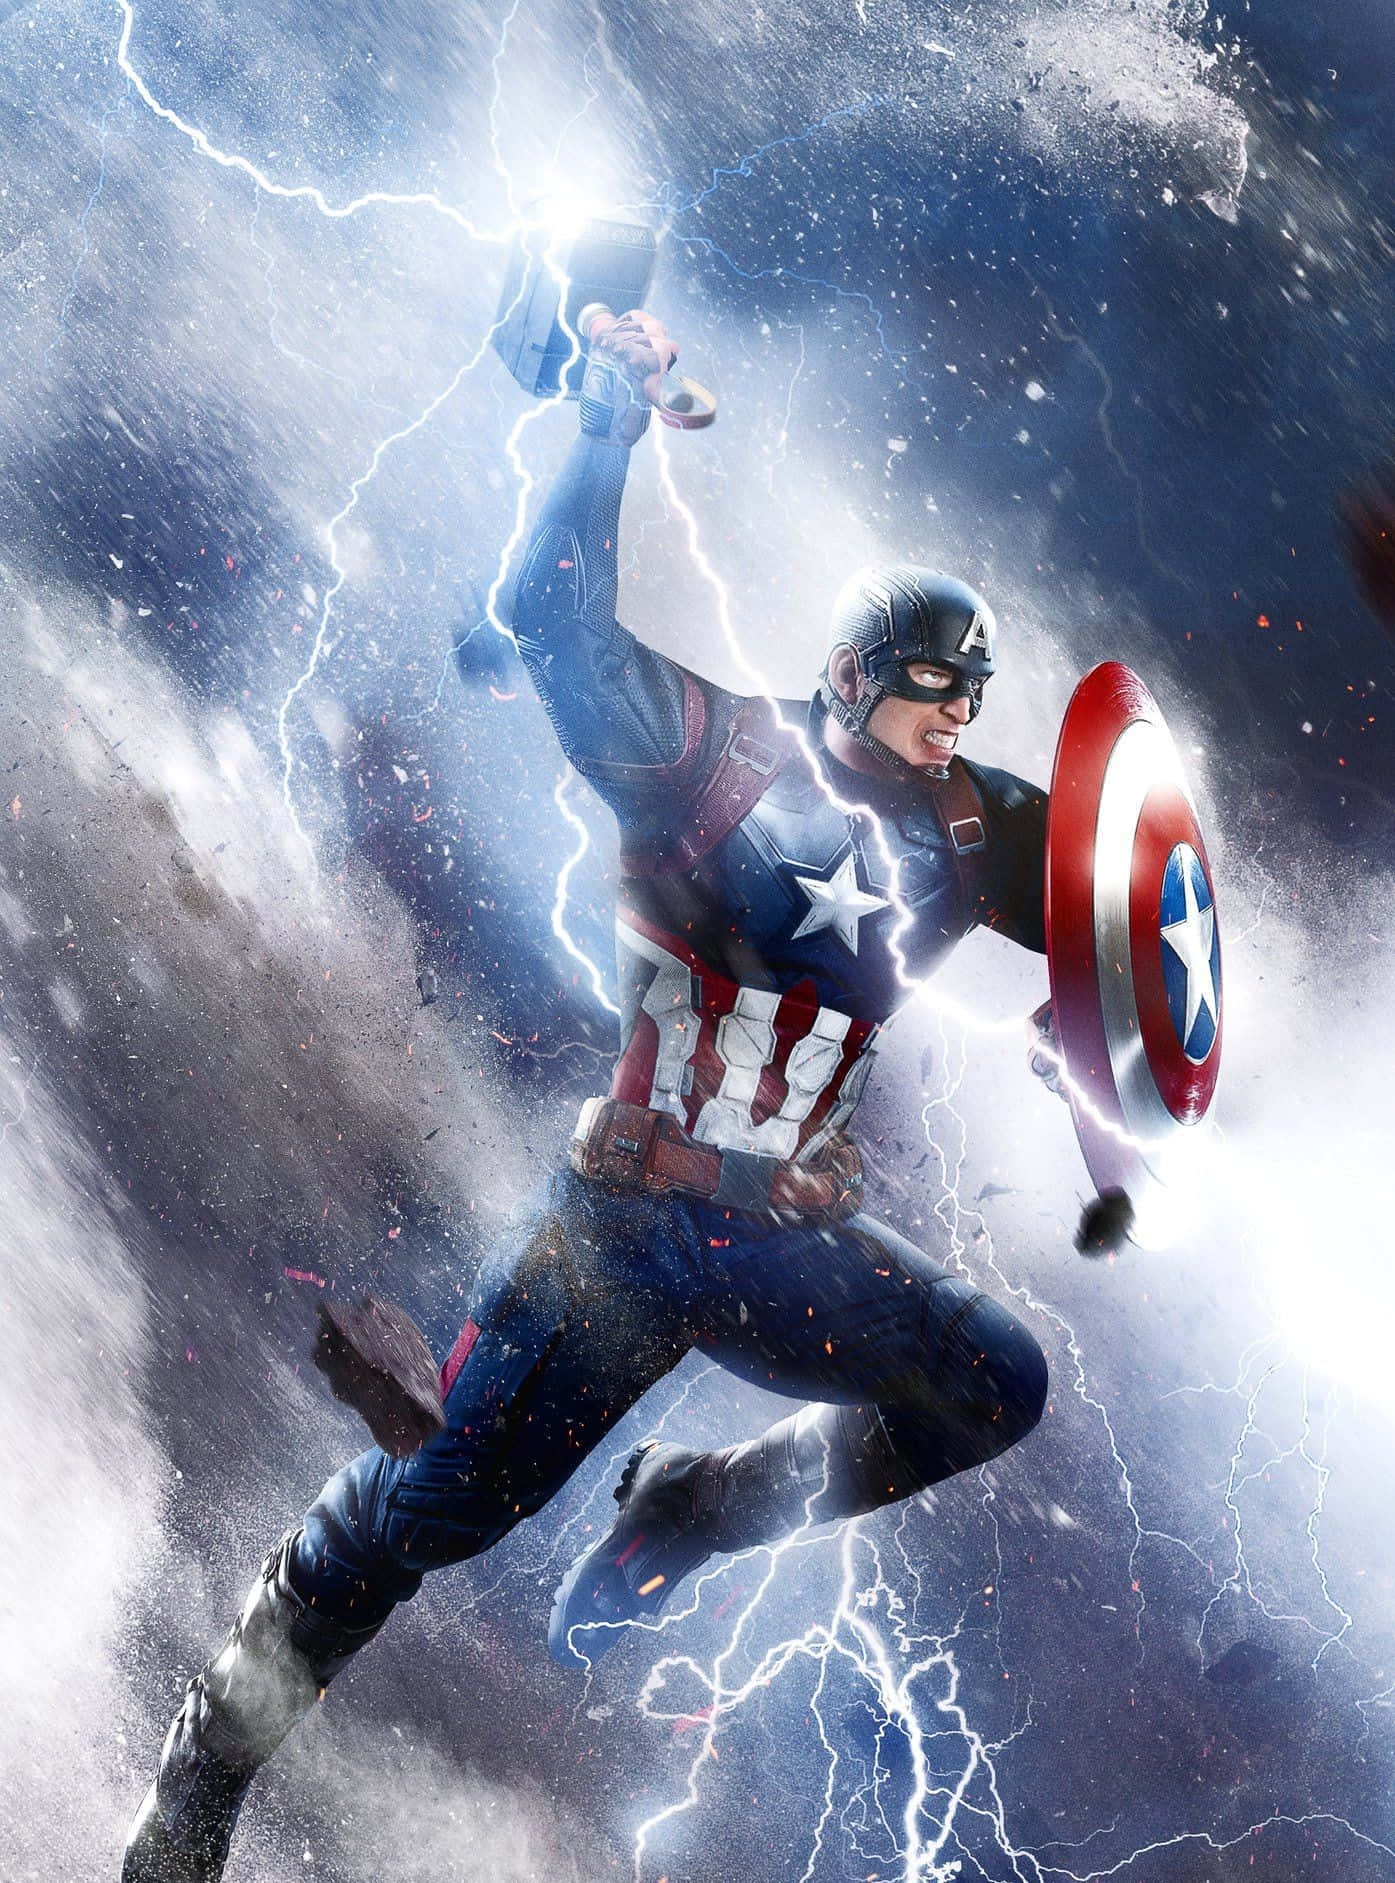 "Fuelled by courage and the American spirit, Captain America Cool stands for justice!" Wallpaper